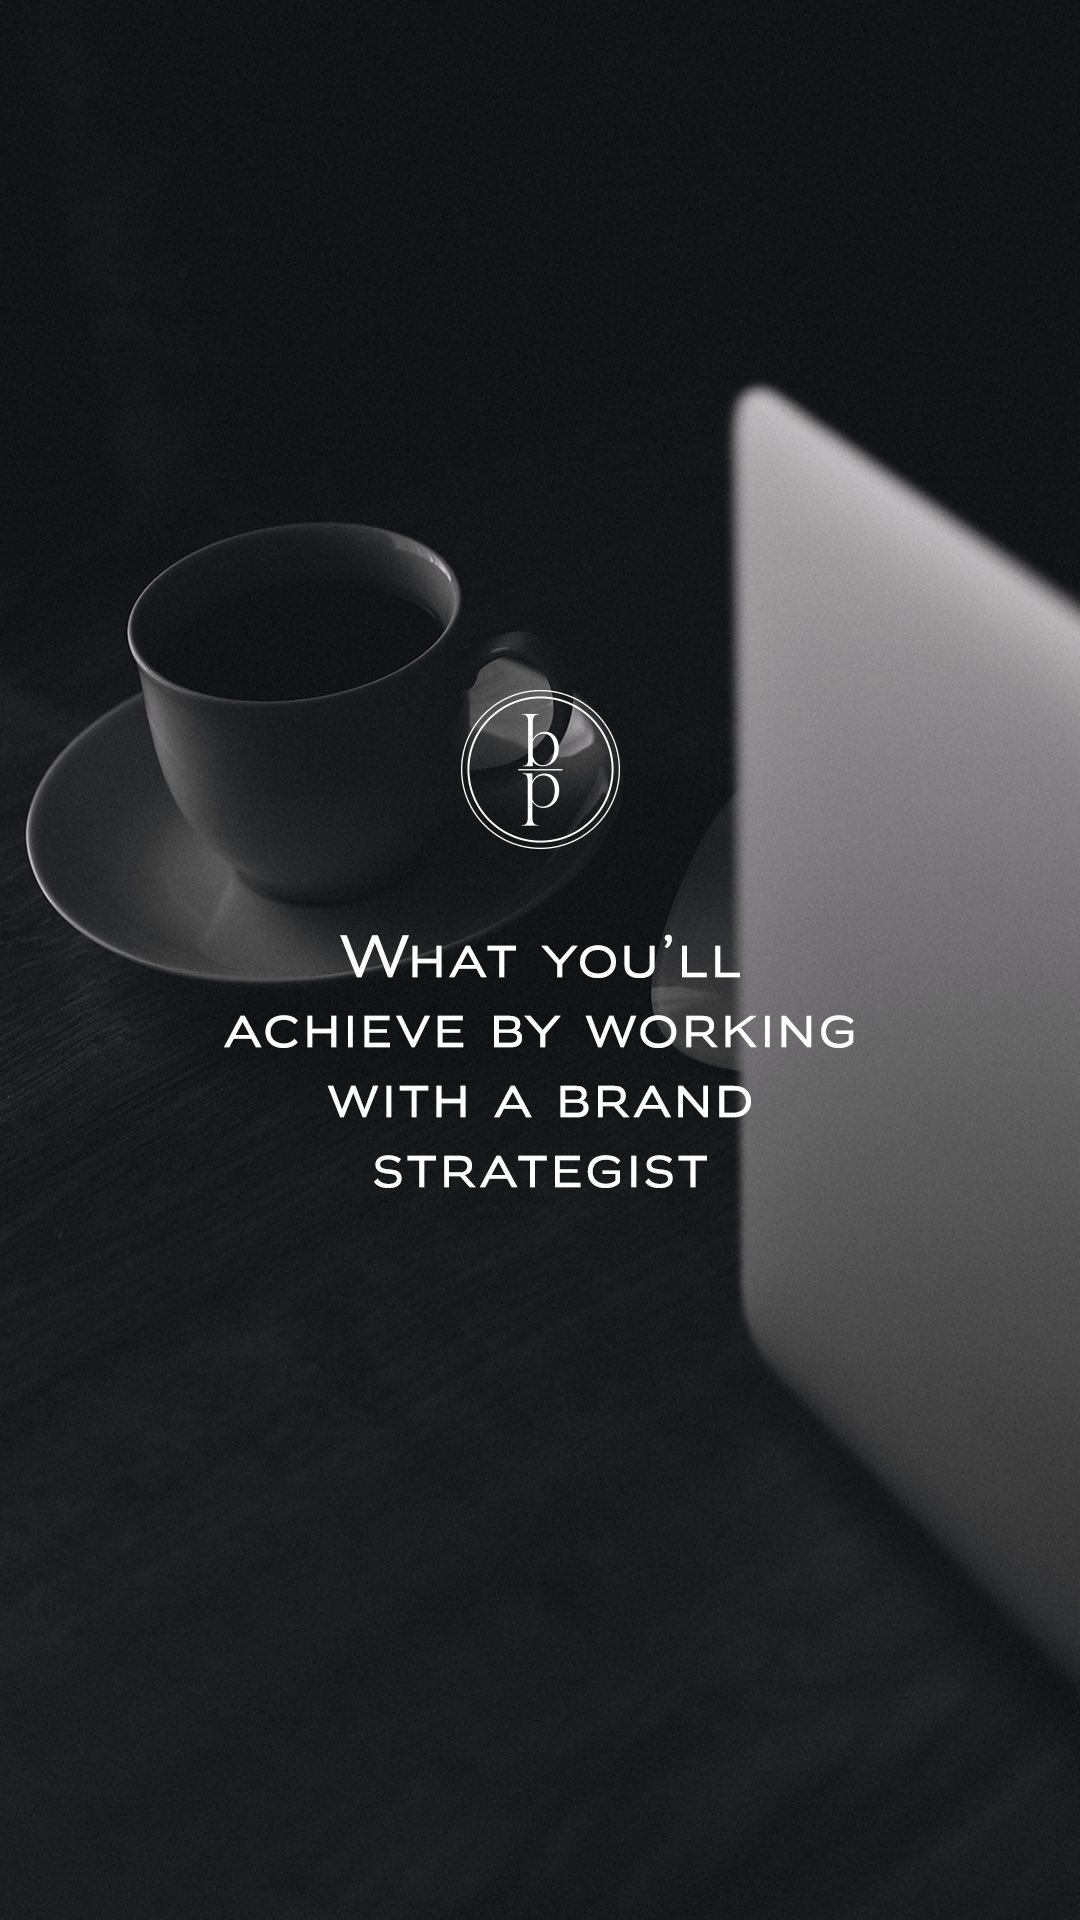 What you should except when working with a Brand Strategist.

01. You’ll have more time and energy to devote to your goals.
- Instead of wasting energy trying to guess what your audience wants or being reactive on all your marketing platforms, you’ll have time and energy to channel your effort toward your goals.

02. You’ll have more confidence
- You’ll feel content in the decisions you are making because you have an intentional foundation built out. 

03. You’ll have more motivation
- You’ll be empowers to move forward with marketing and take action because you’ll have a plan.

04. You’ll feel less stressed
- You’ll finally feel like you have a handle on things.

05. You’ll establish healthy boundaries
- When you set limits, you’ll improve your communications and start respecting your true values in life and business. 

We want this for you!

And if you stick with us, it’s gonna get deep, but it’s gonna be a lot of fun!
🖤

#brandstrategy #branding #branddesigner #brandstrategist #branddevelopment #brandingidentity #businessbranding #brandingtips #brandingconsultant #brandingdesigner #brandstylist #welovebranding #creativedesign #graphicdesigner  #branddesign #brandstylist #buildyourbrand #brandstrategy #brandconsultant #marketingconsultant